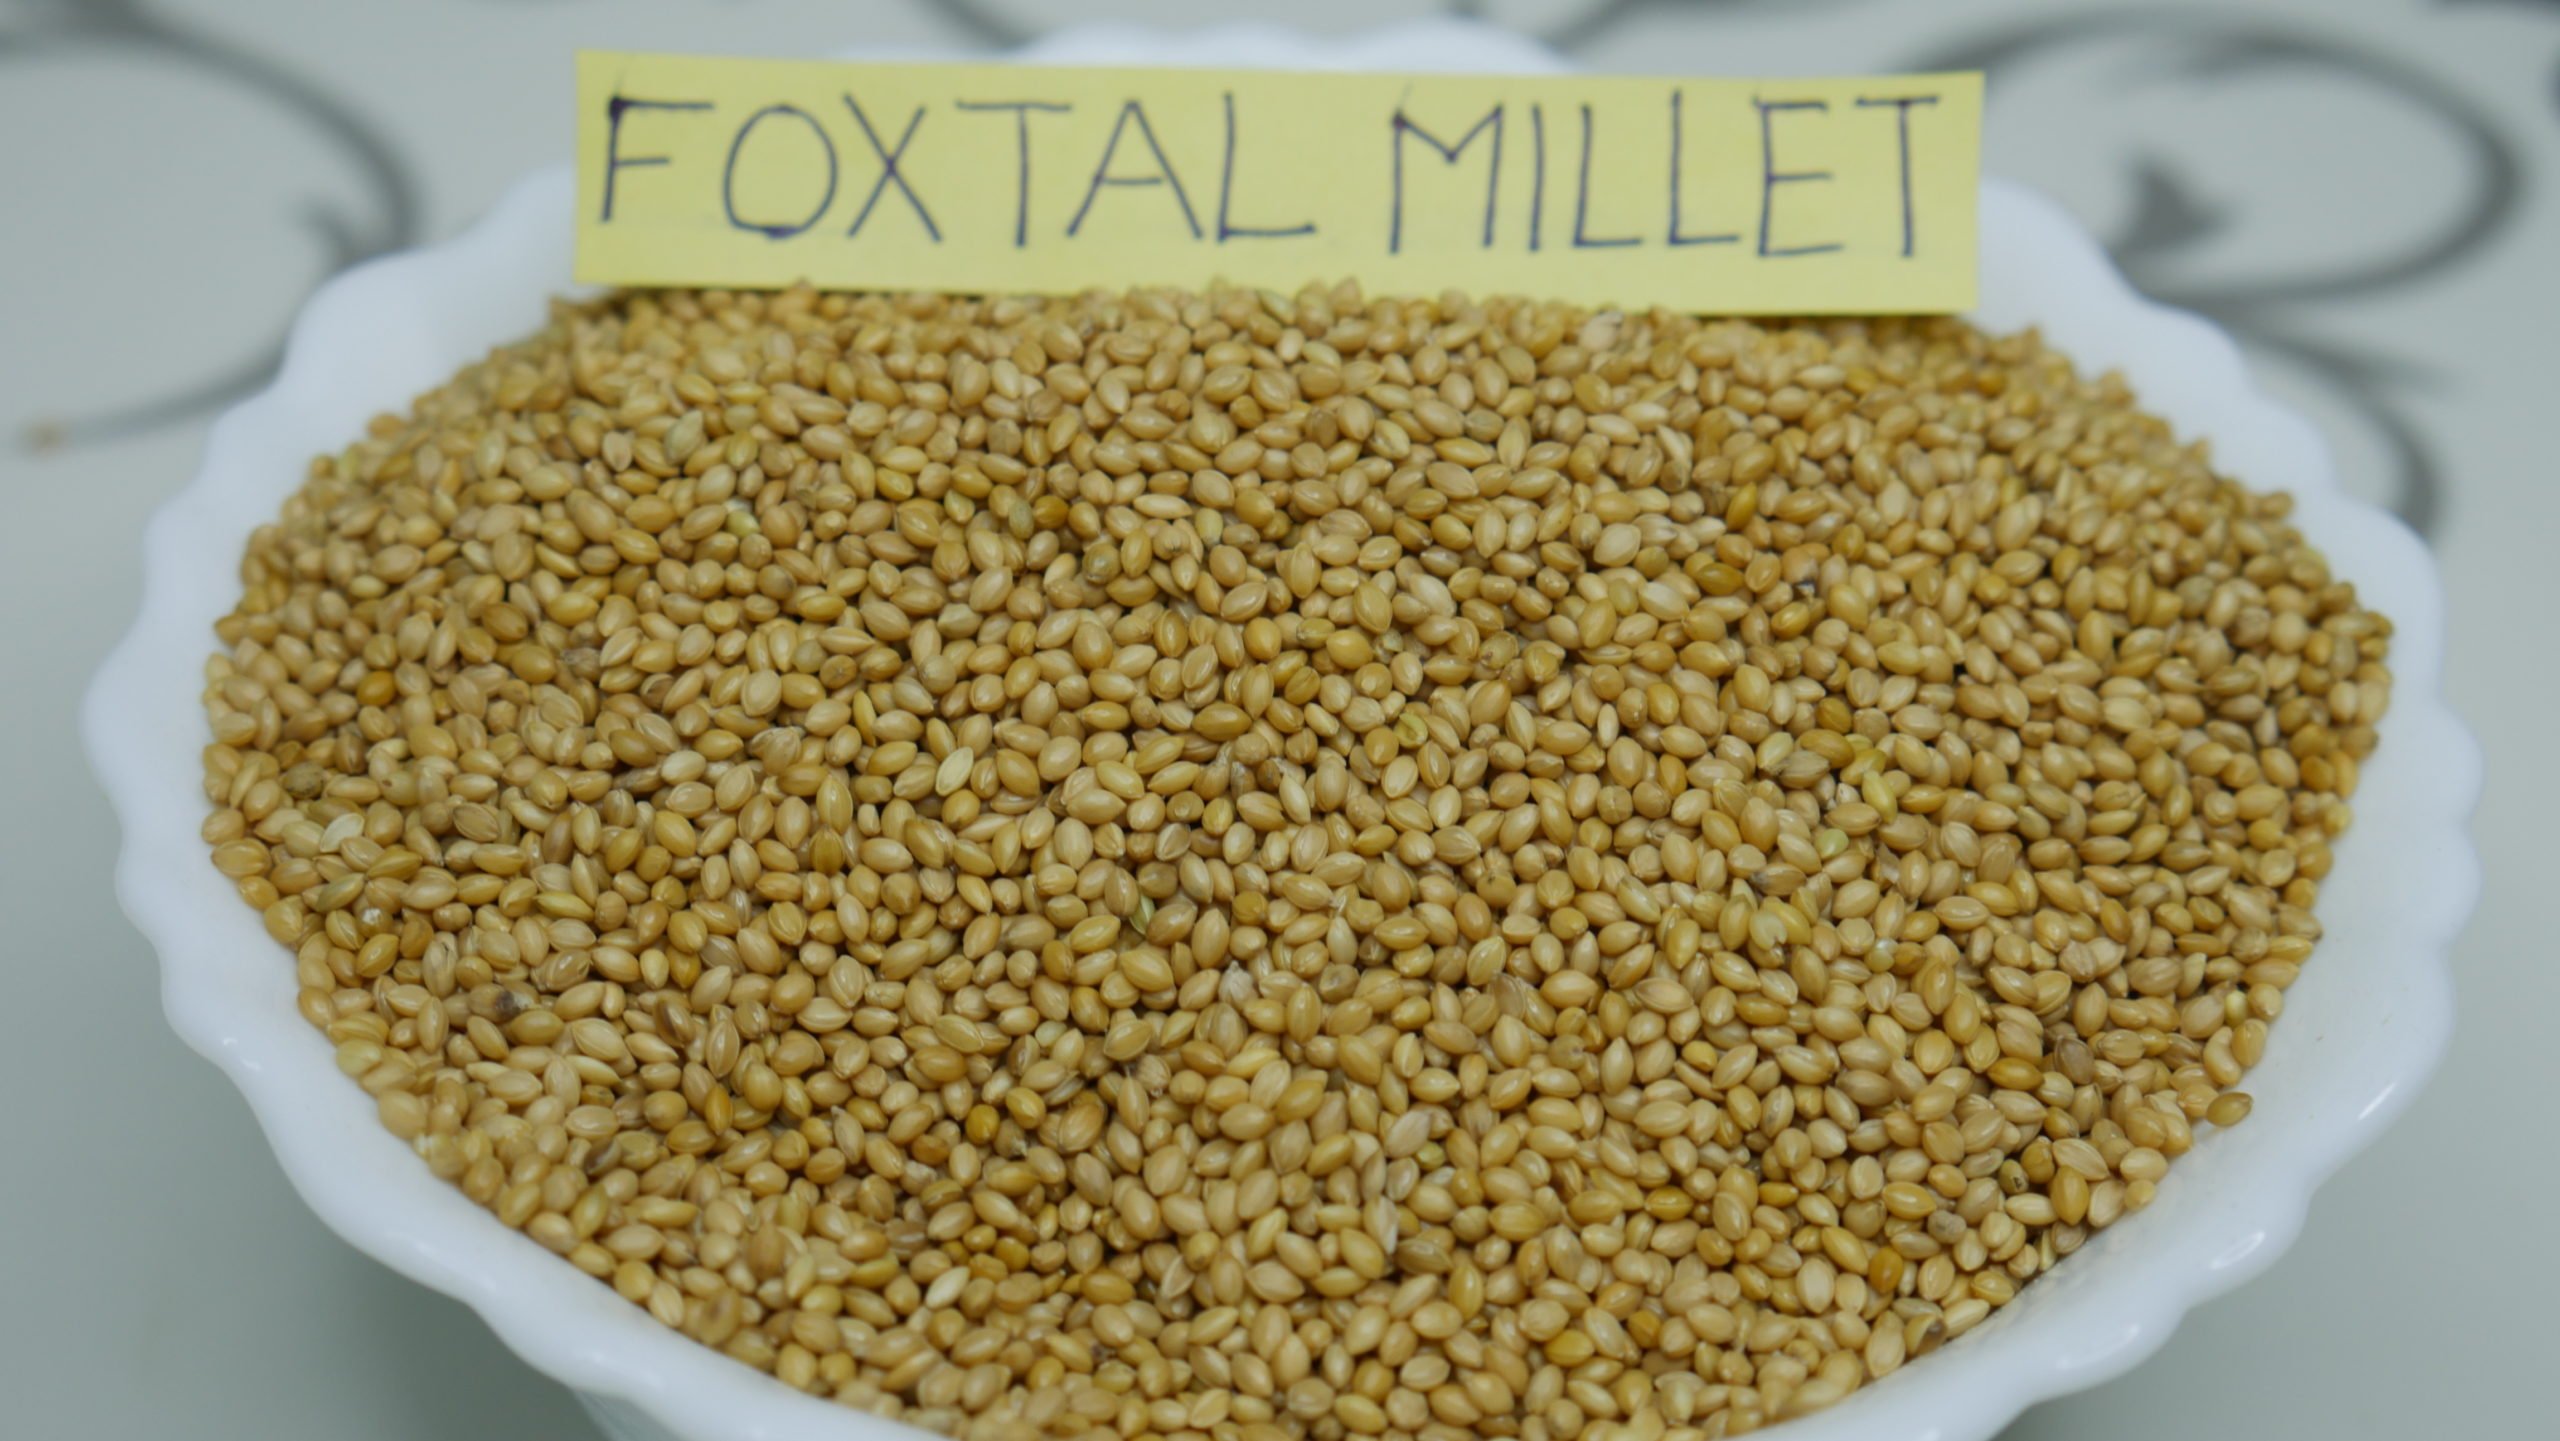 Foxtail Millet 2 Scaled 